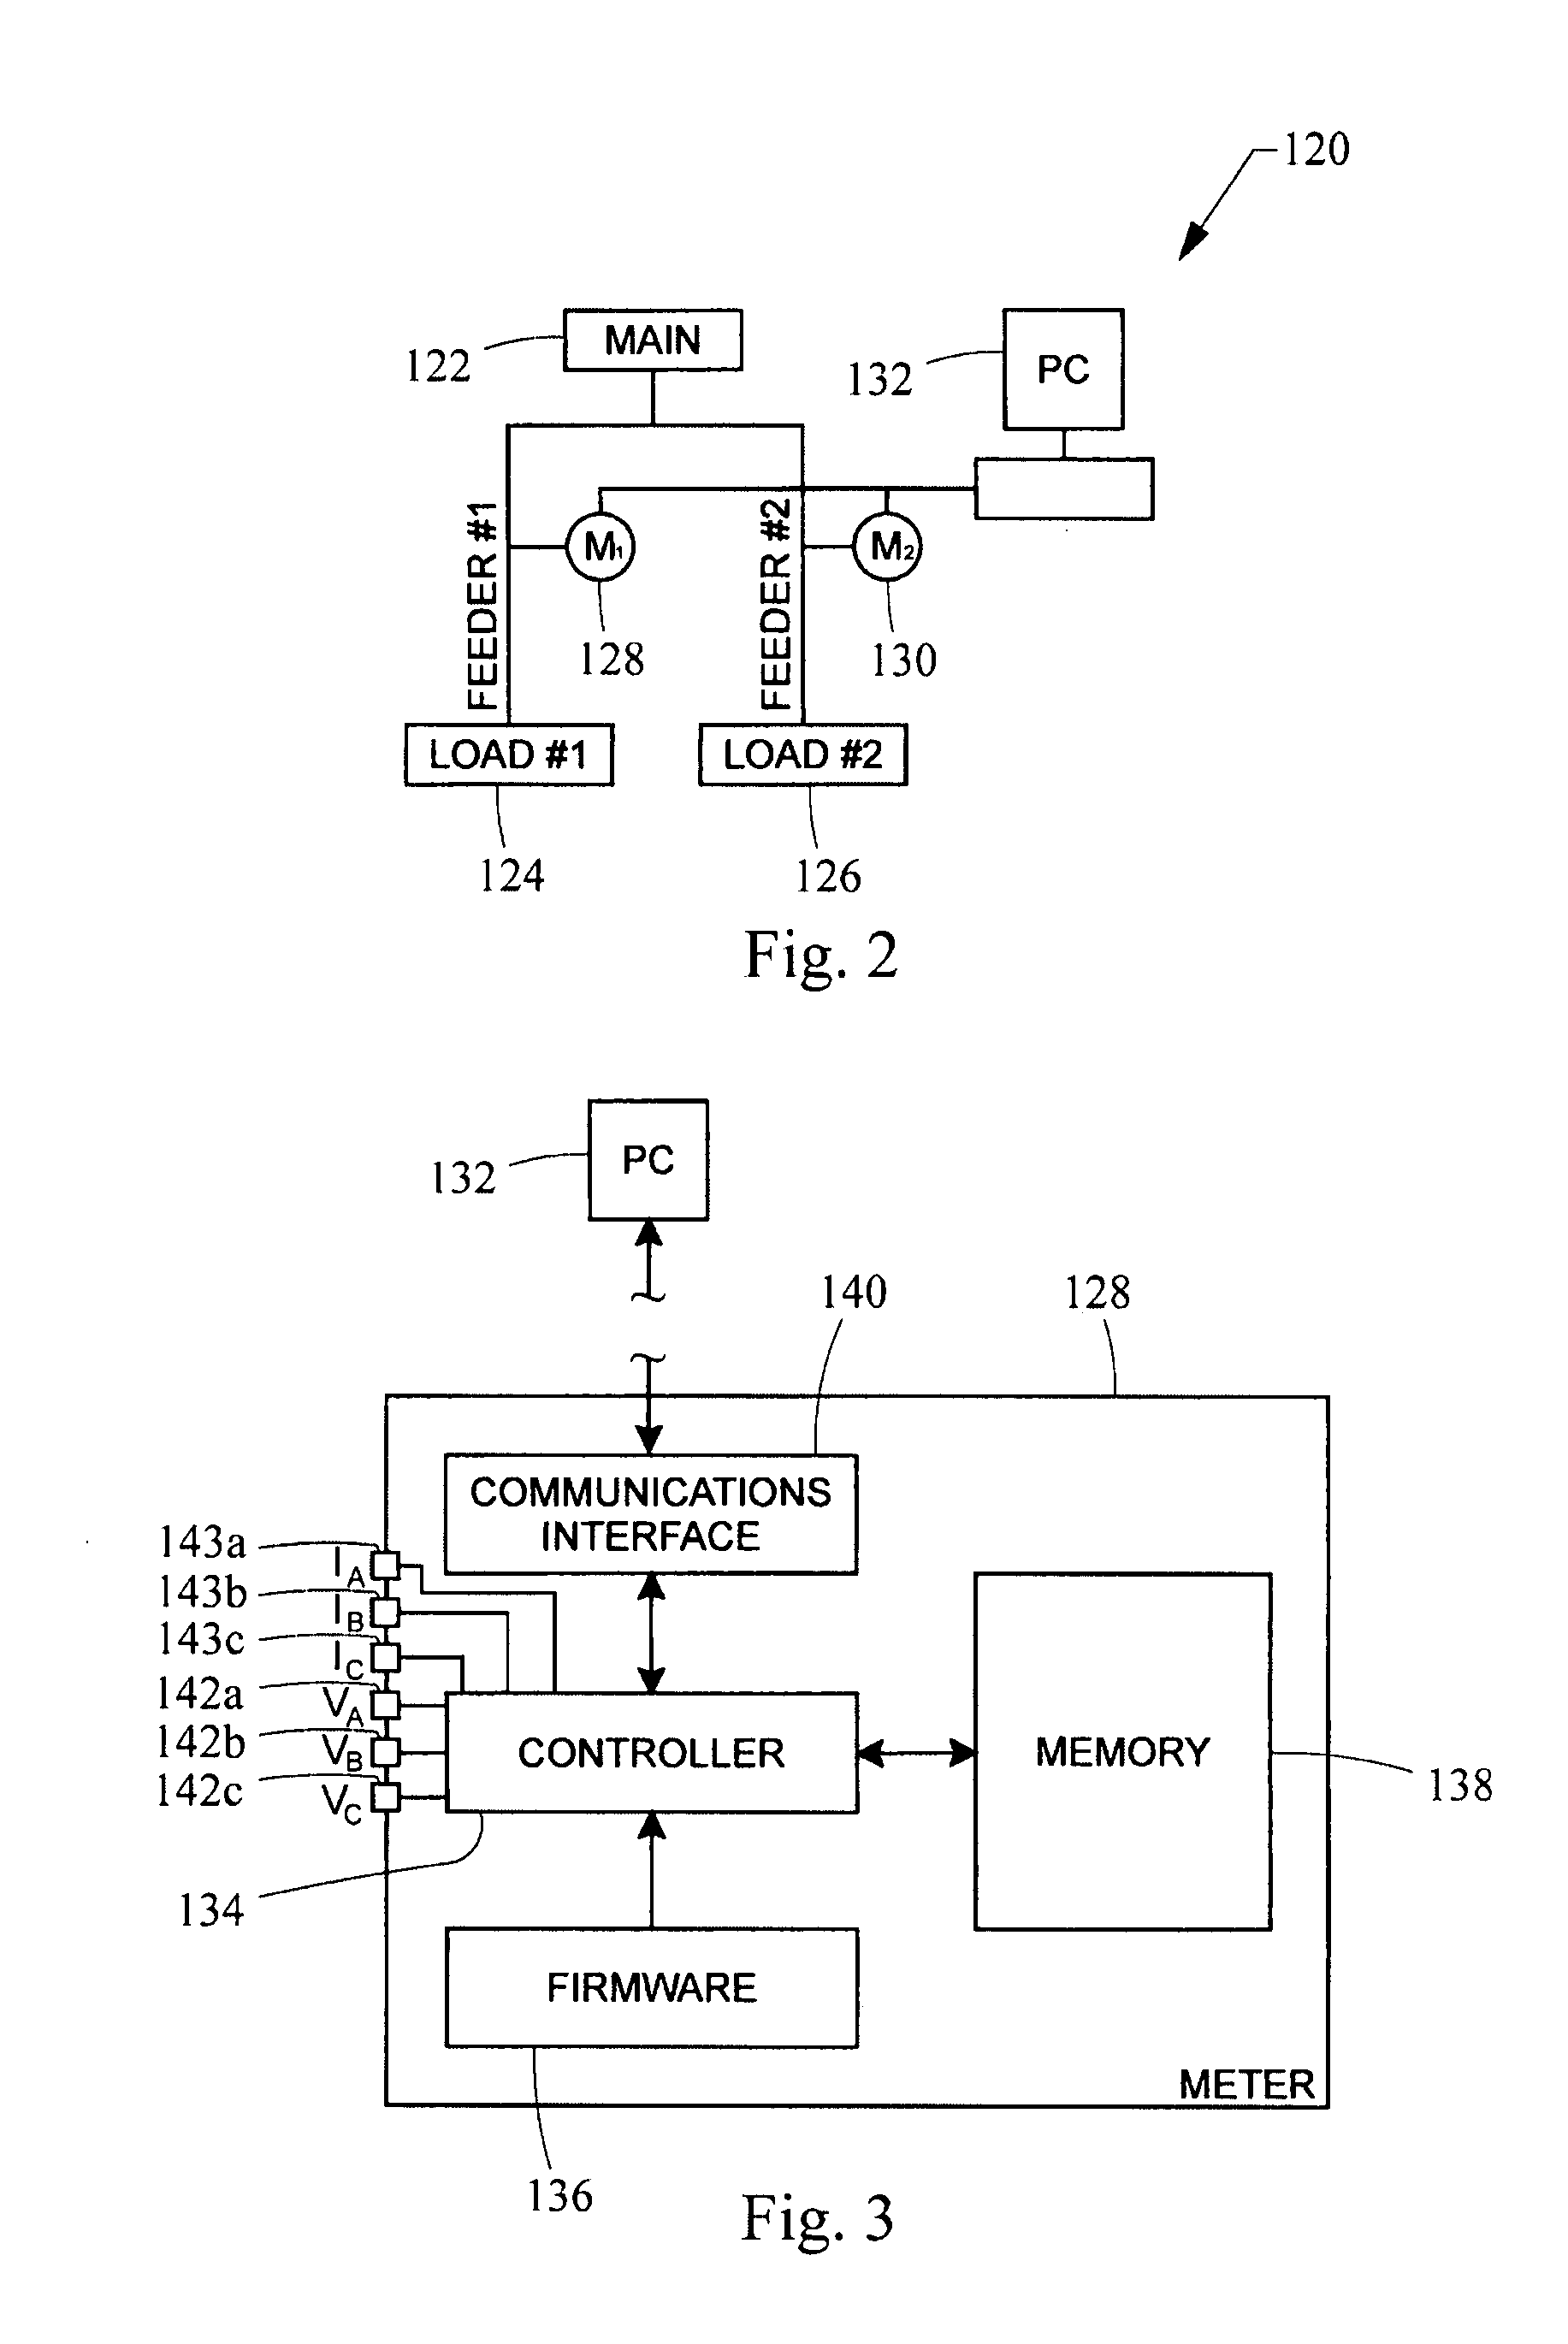 Automated data alignment based upon indirect device relationships